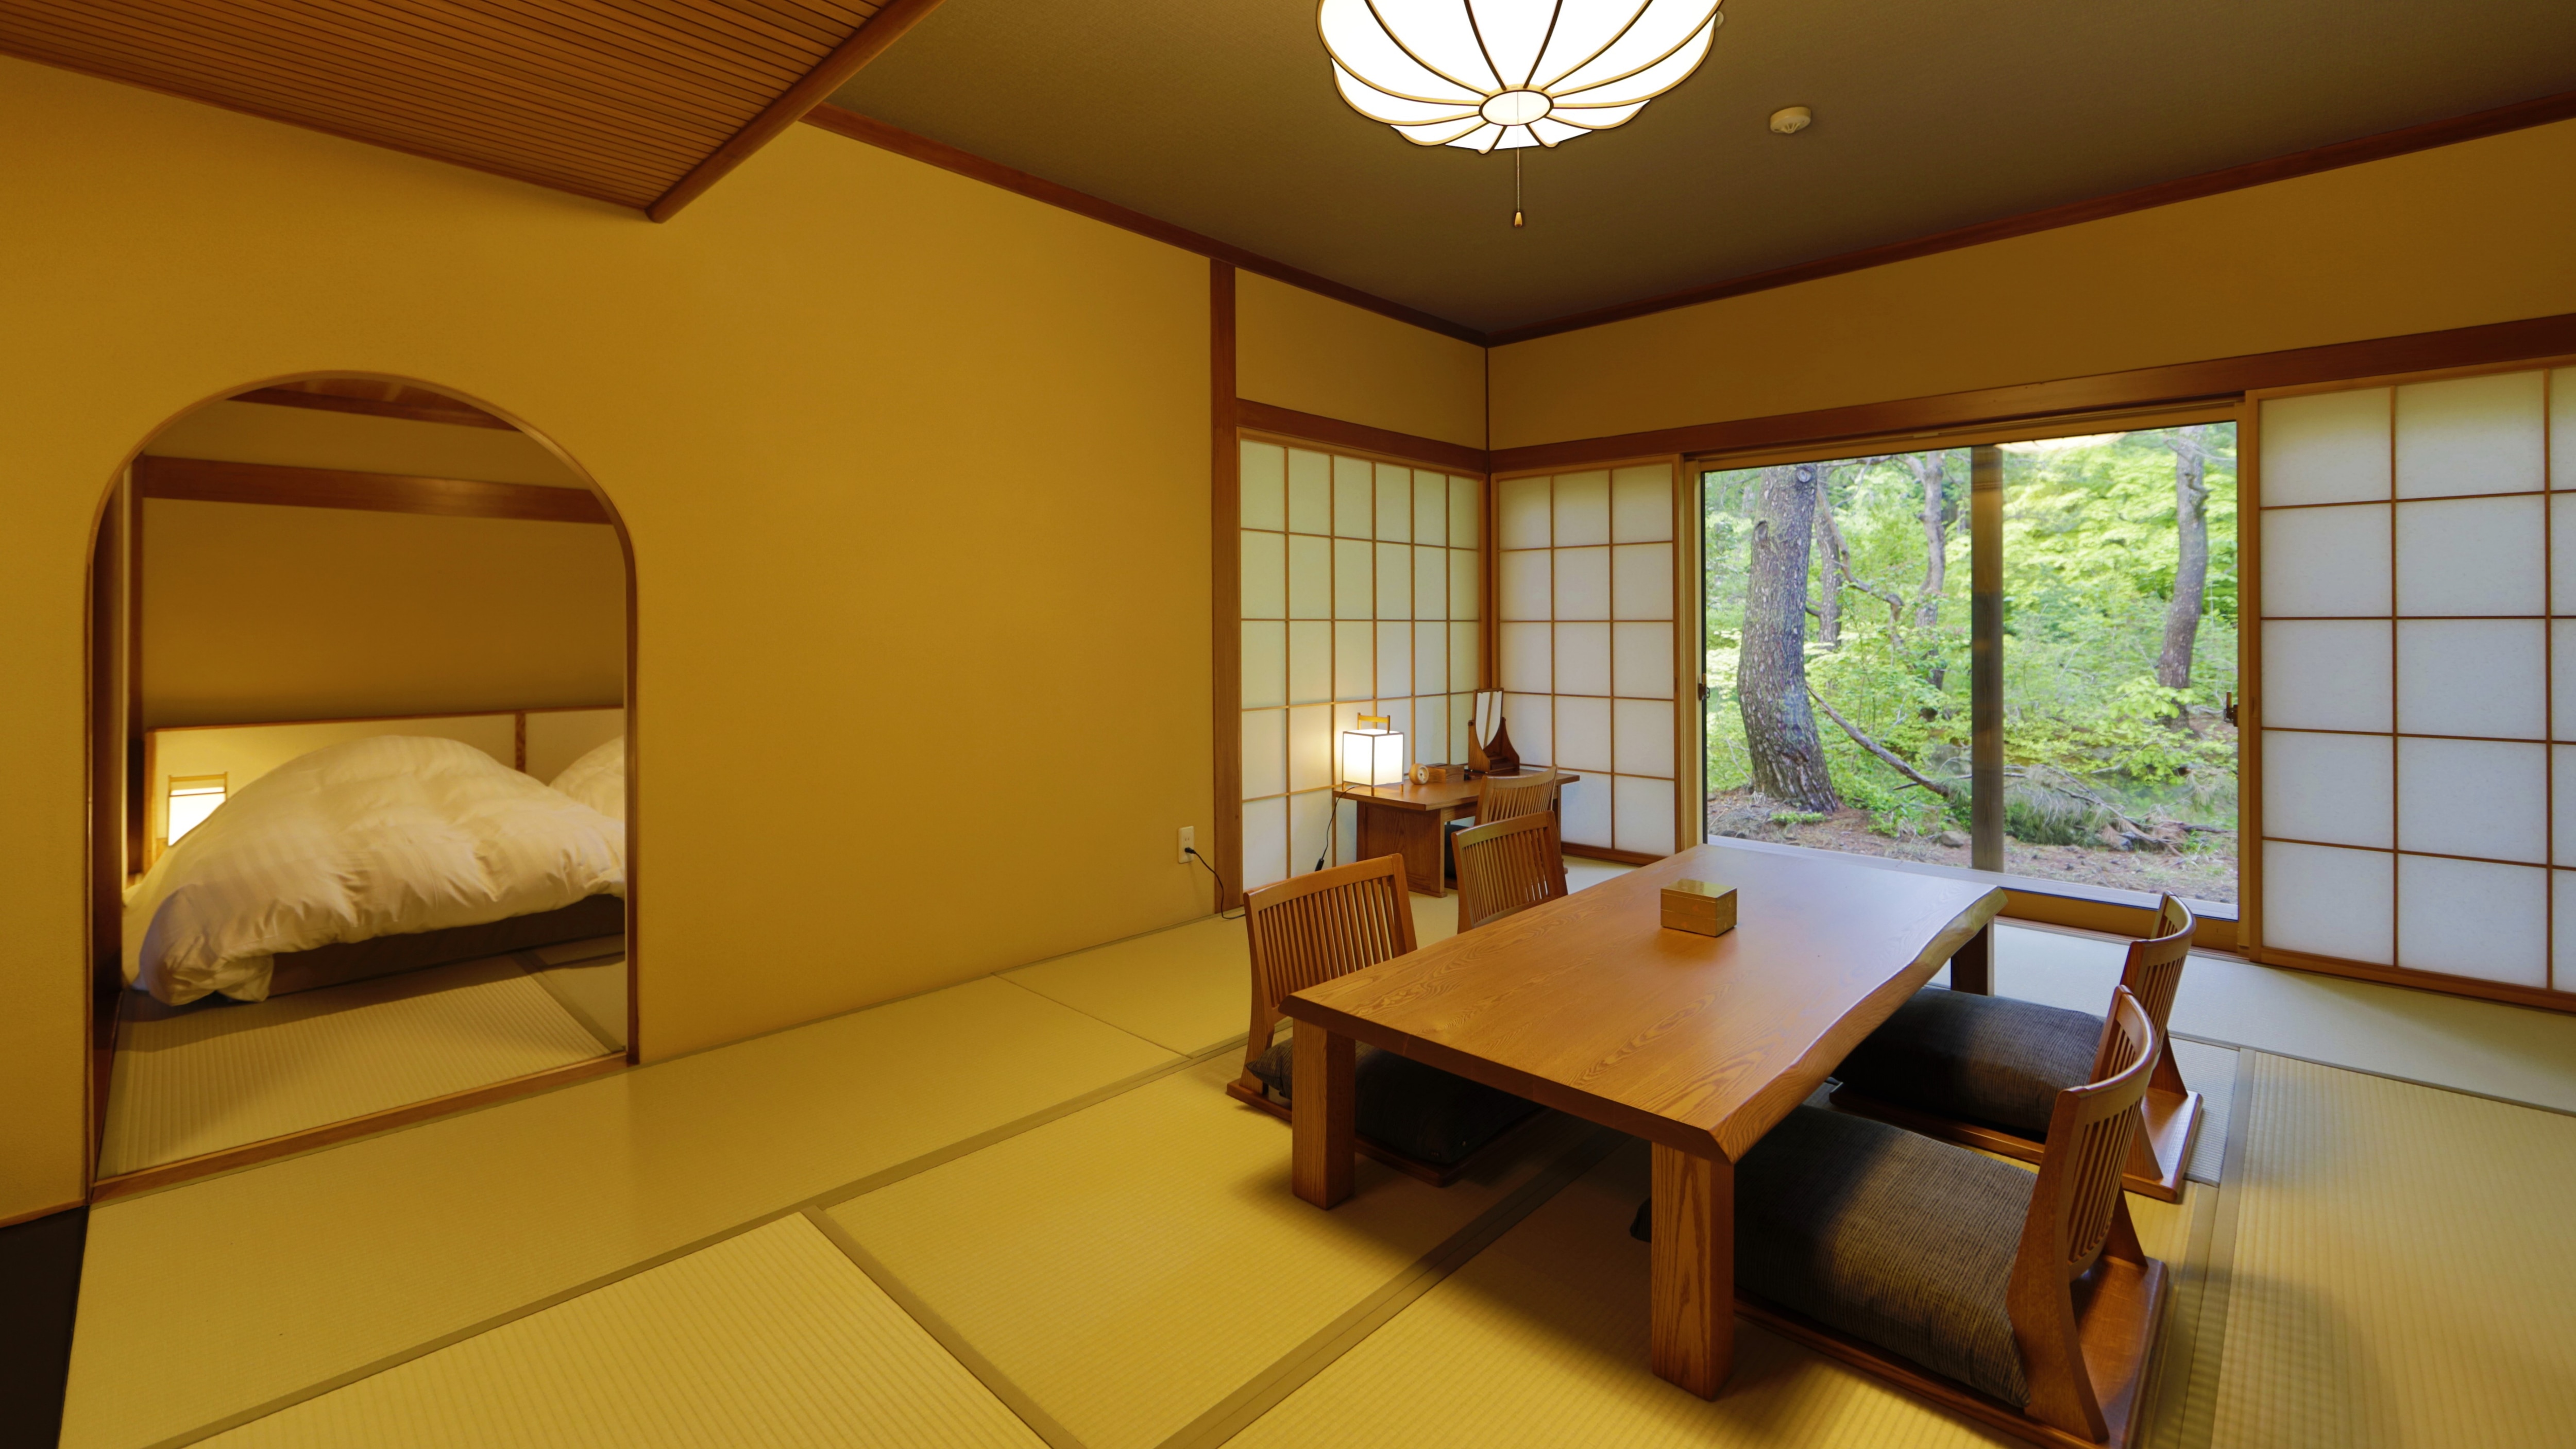 [Away] An example of a guest room at Tennoza "Rentei". I feel nostalgic for the good old Japanese tea room architecture.